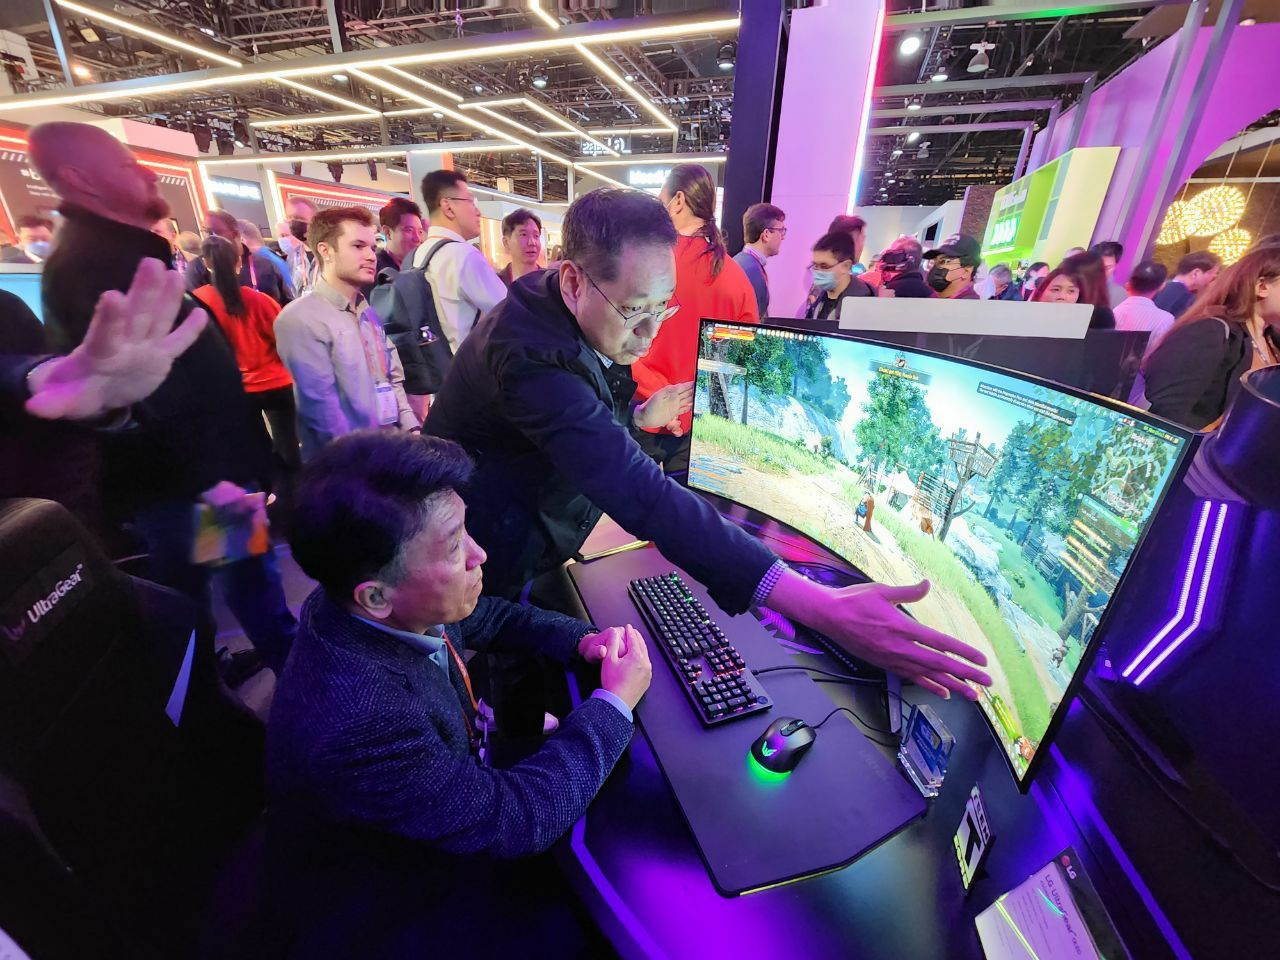 Hana Financial Group Chairman Ham Young-joo looks at a gaming monitor at the LG Electronics booth at the CES trade show in Las Vegas on Thursday. (Hana Financial Group)